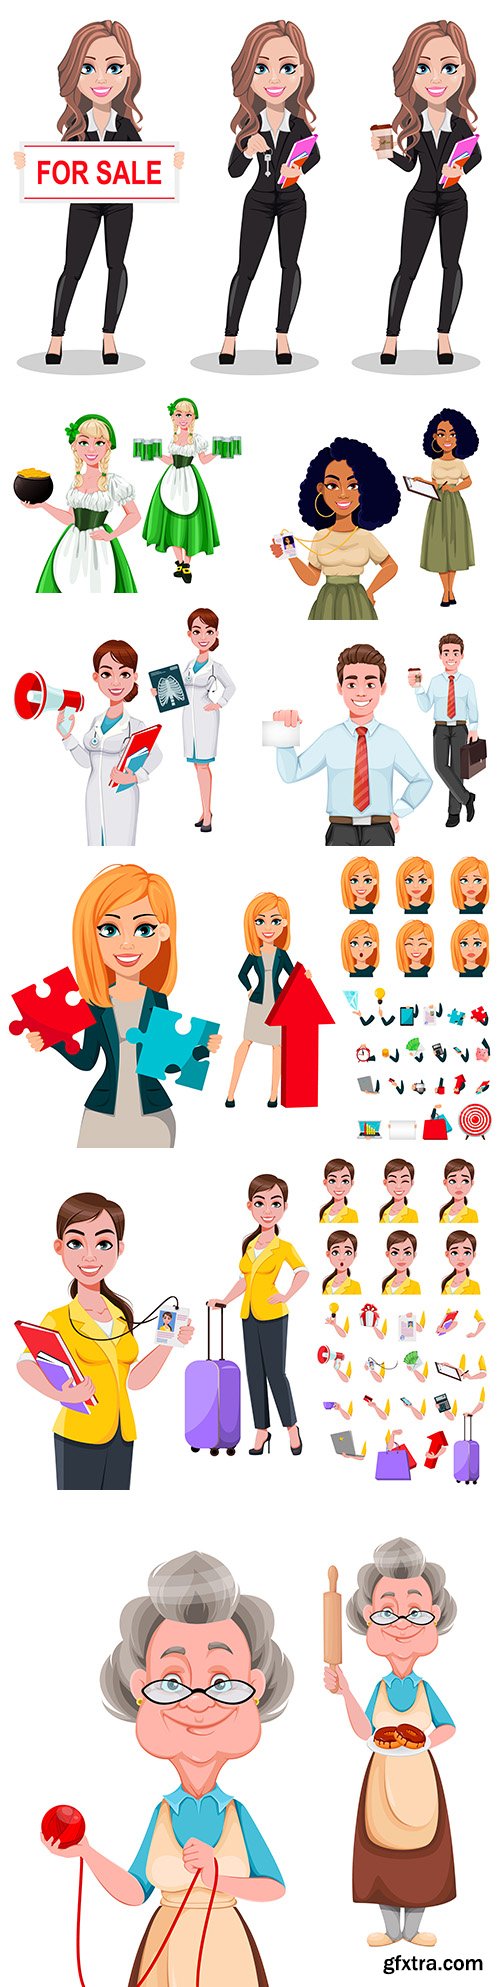 People cartoon character illustrating different professions